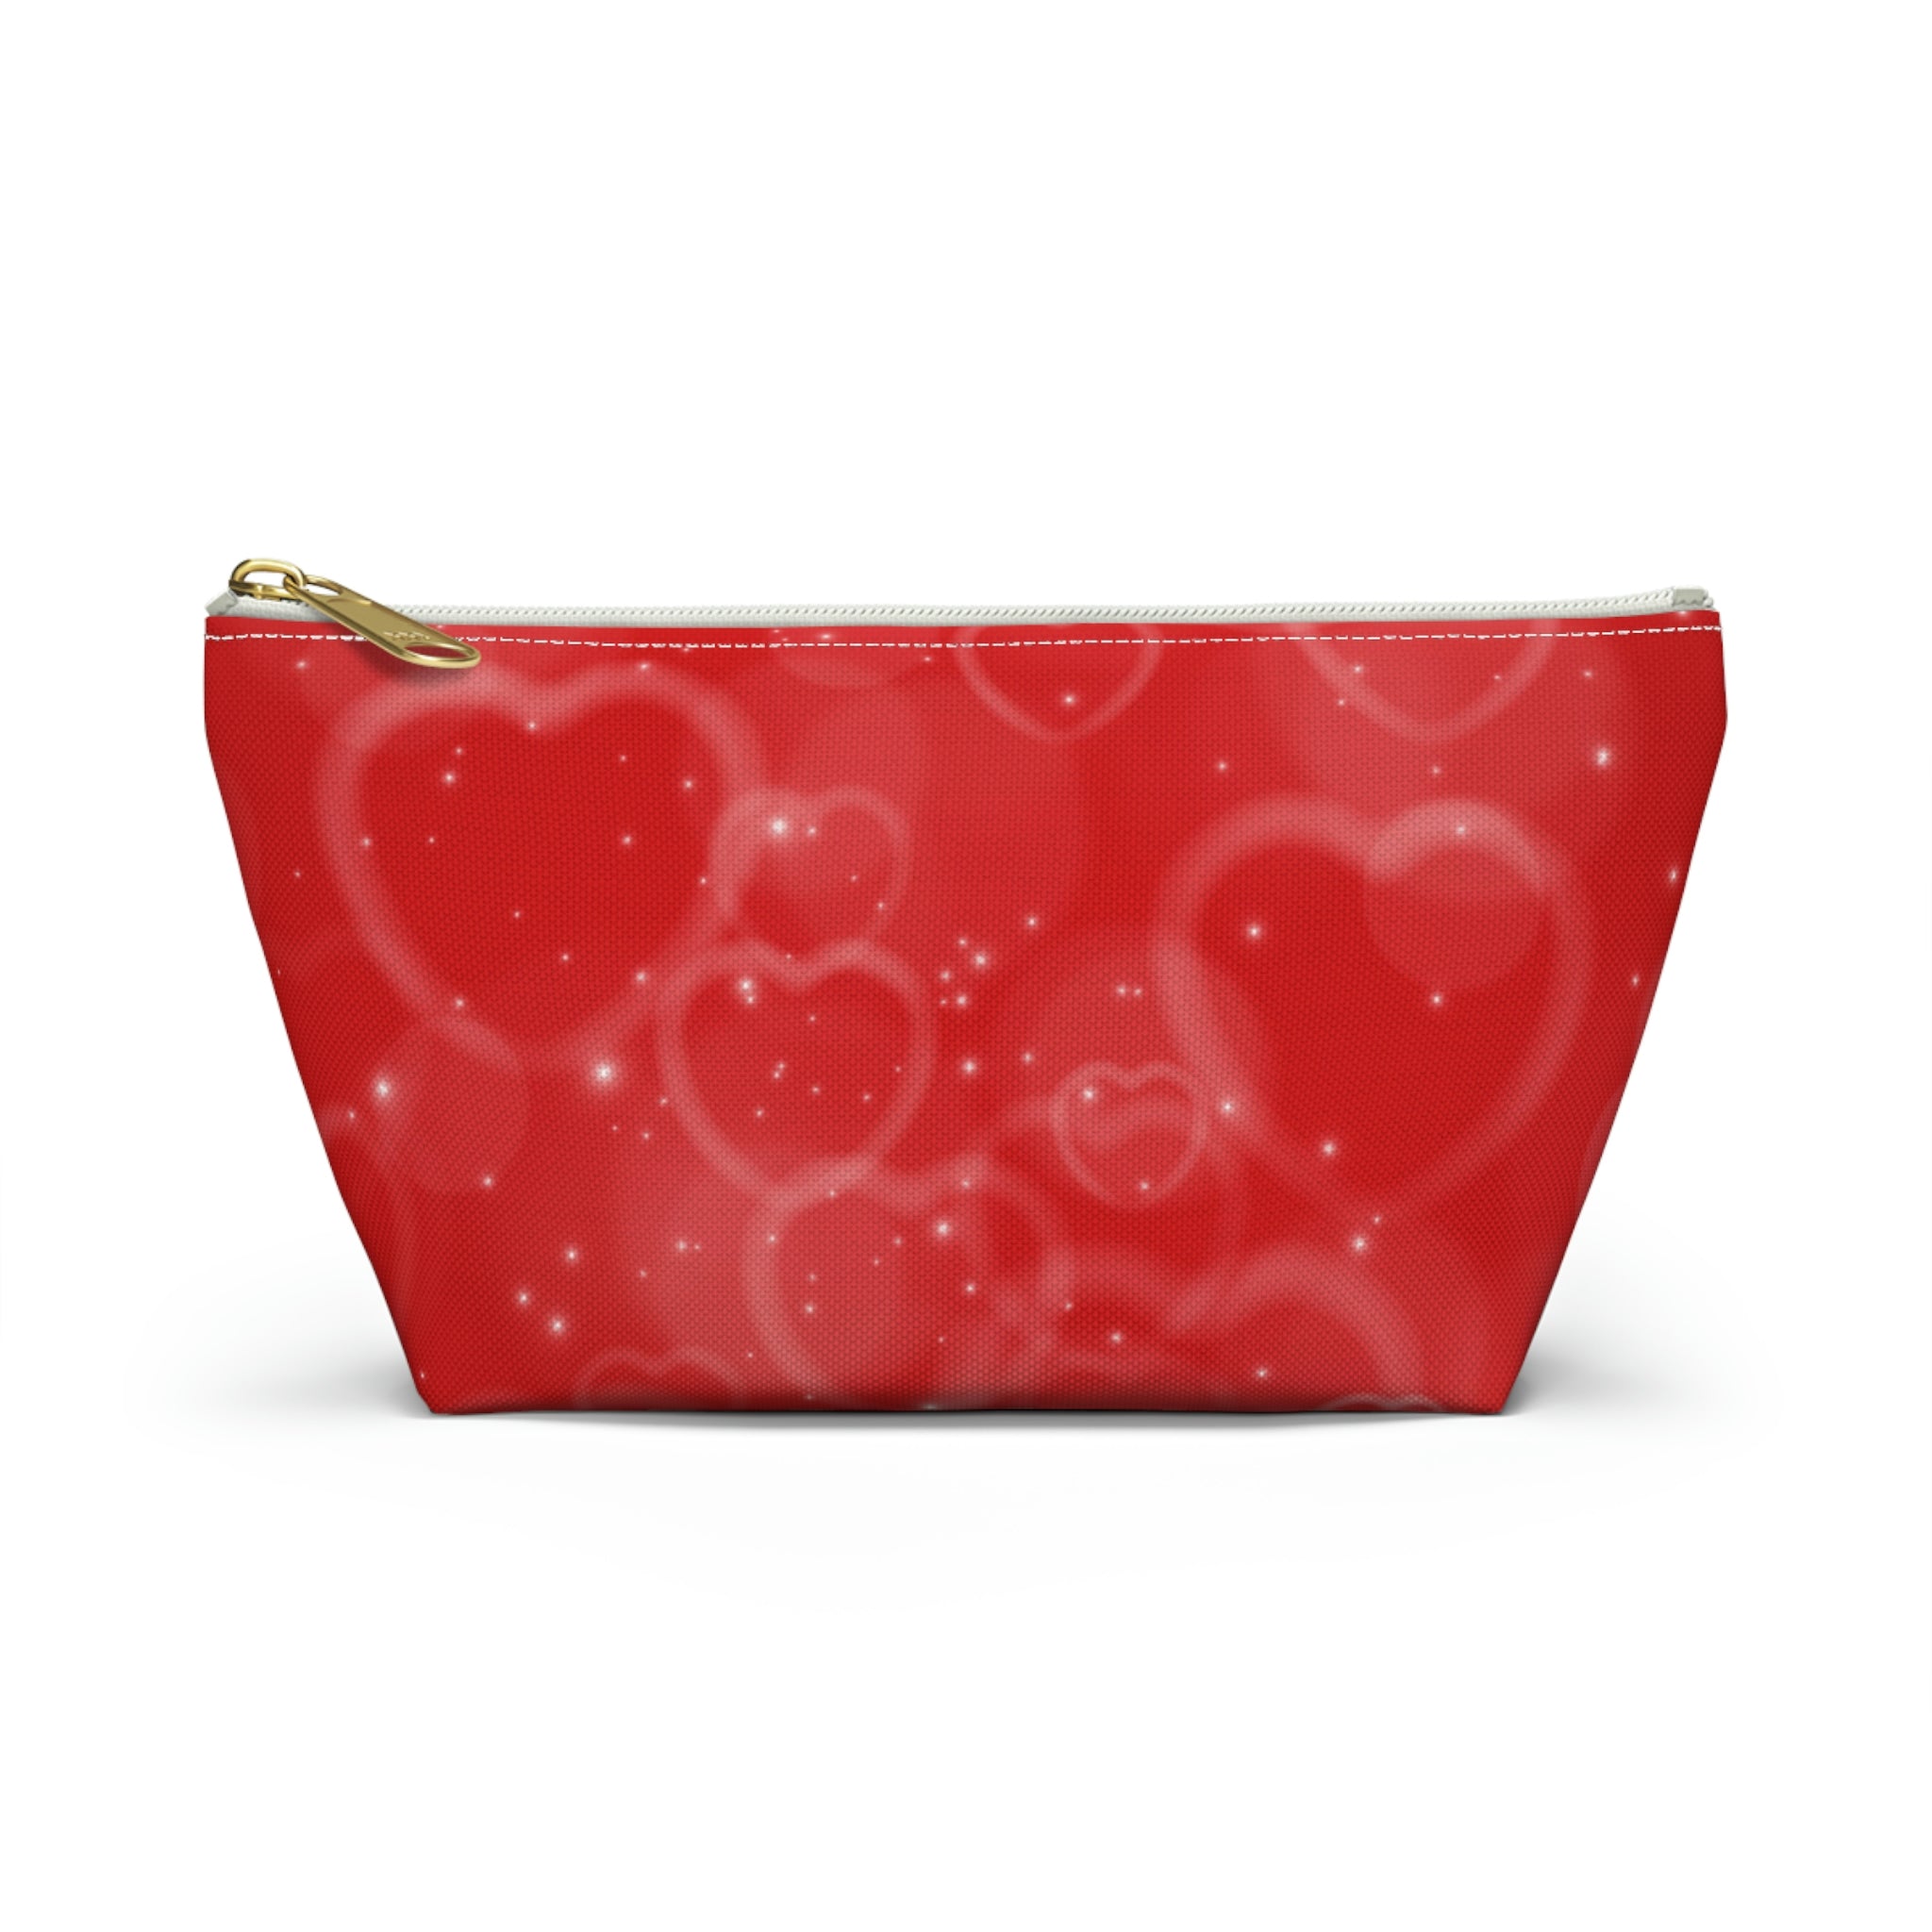 Valentine Heart Accessory Pouch w T-bottom || Starr Plans Exclusive